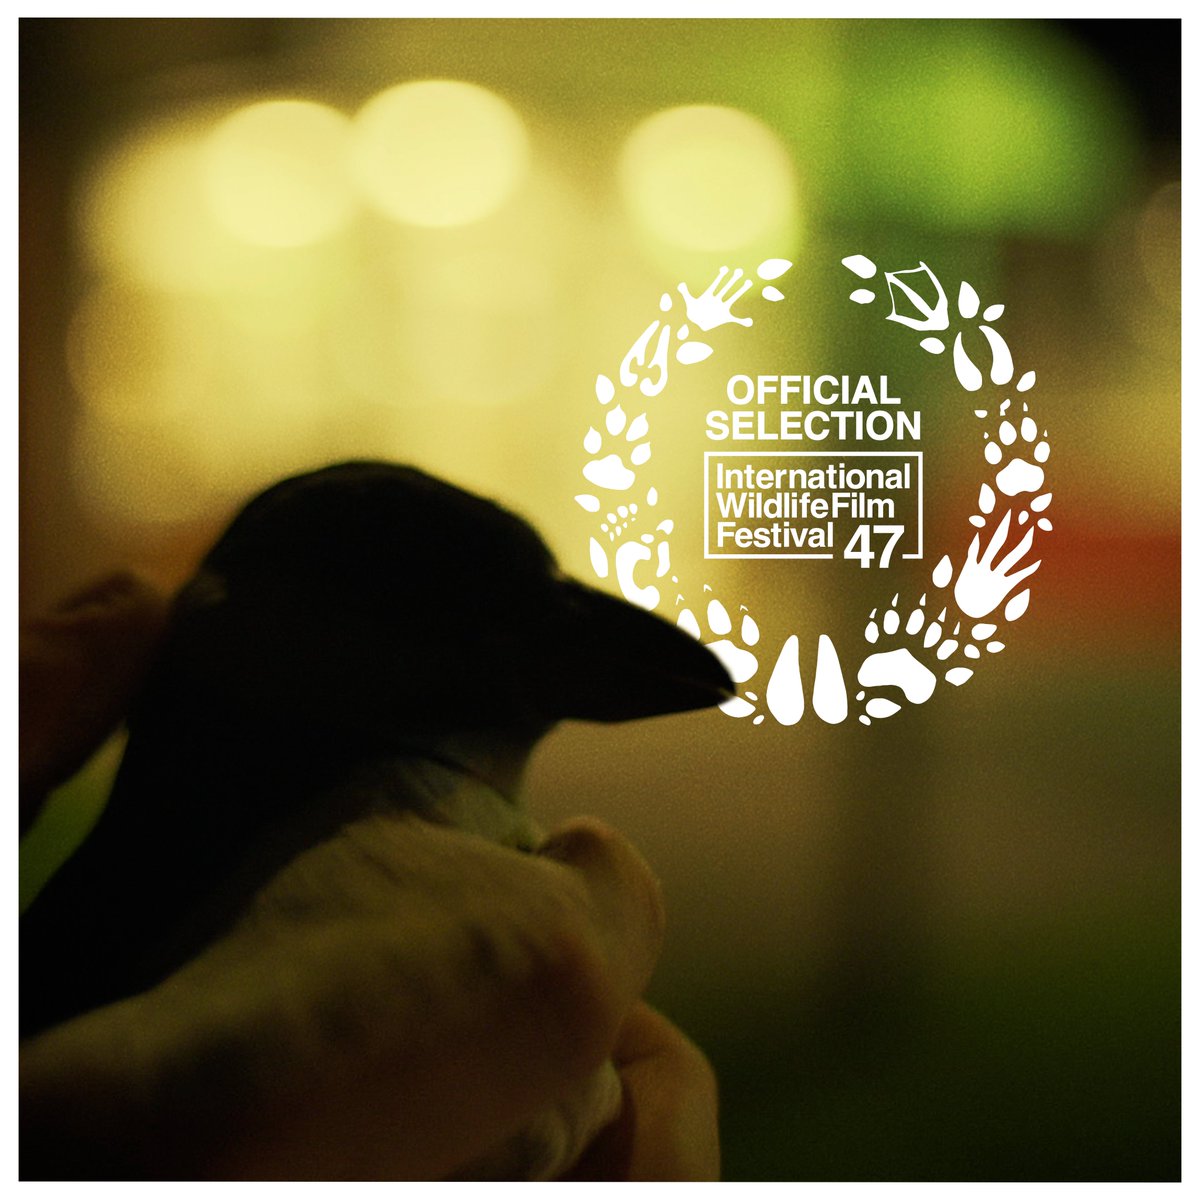 We're honoured to be screening at the 47th International Wildlife Film Festival on April 22nd and 24th (@IntlWldFilmFest)!